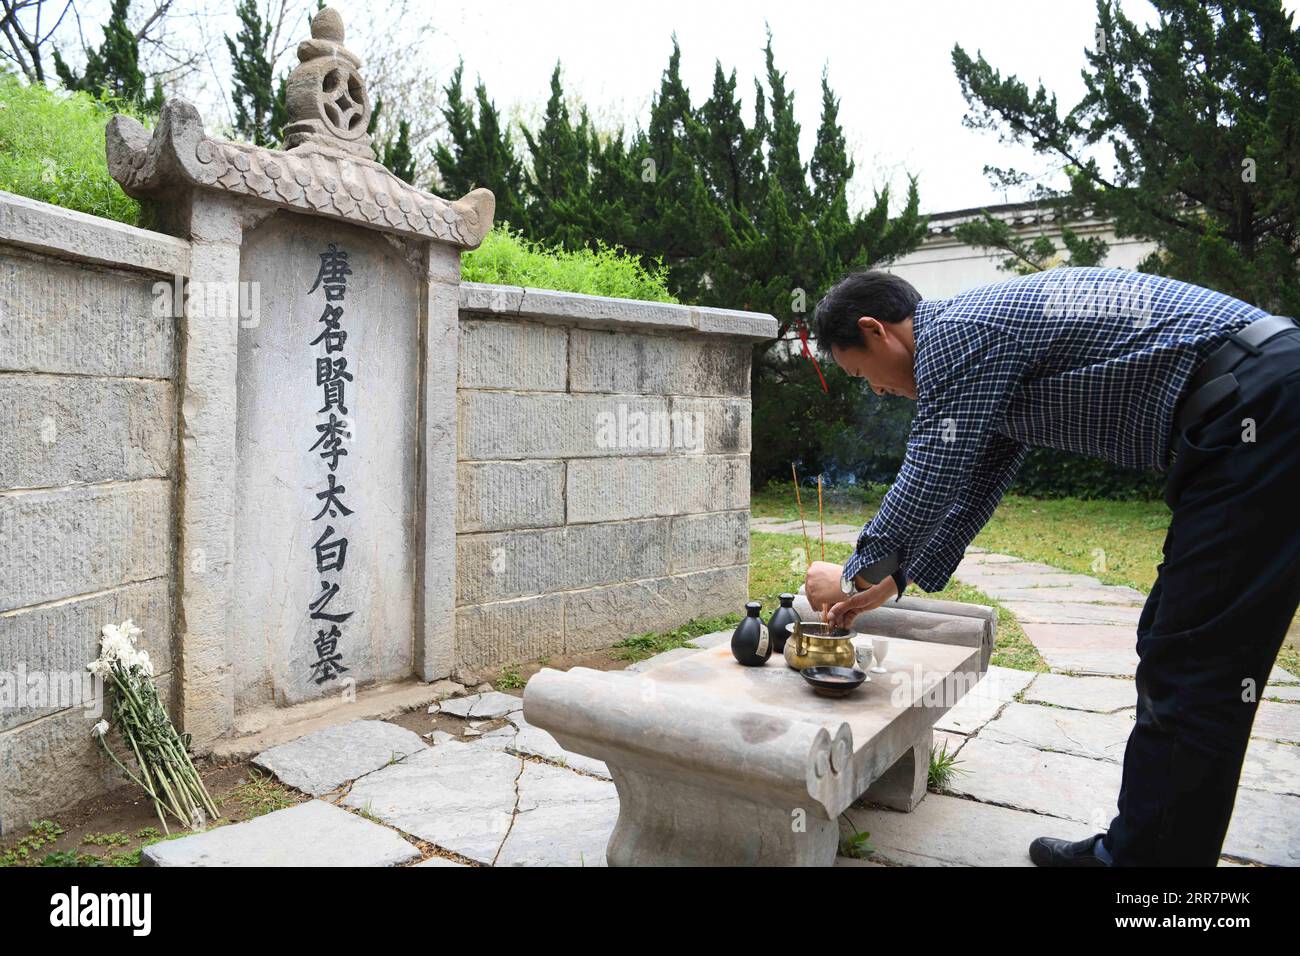 210402 -- DANGTU, April 2, 2021 -- Gu Changxin pays respect to Li Bai in front of his tomb at Li Bai cultural park in Dangtu County of Maanshan City, east China s Anhui Province, March 31, 2021. The tomb of Li Bai, a famous poet of Tang Dynasty 618-907, is located at the foot of Qingshan Mountain in Dangtu County of Maanshan City. After Li Bai died in Dangtu, his good friend Gu Lanxin offered his land as Li Bai s burial place. Since then, the Gu s family has become the guardian of Li Bai s tomb, which continues to this day. In 1985, 18-year-old Gu Changxin became the 49th generation tomb keepe Stock Photo